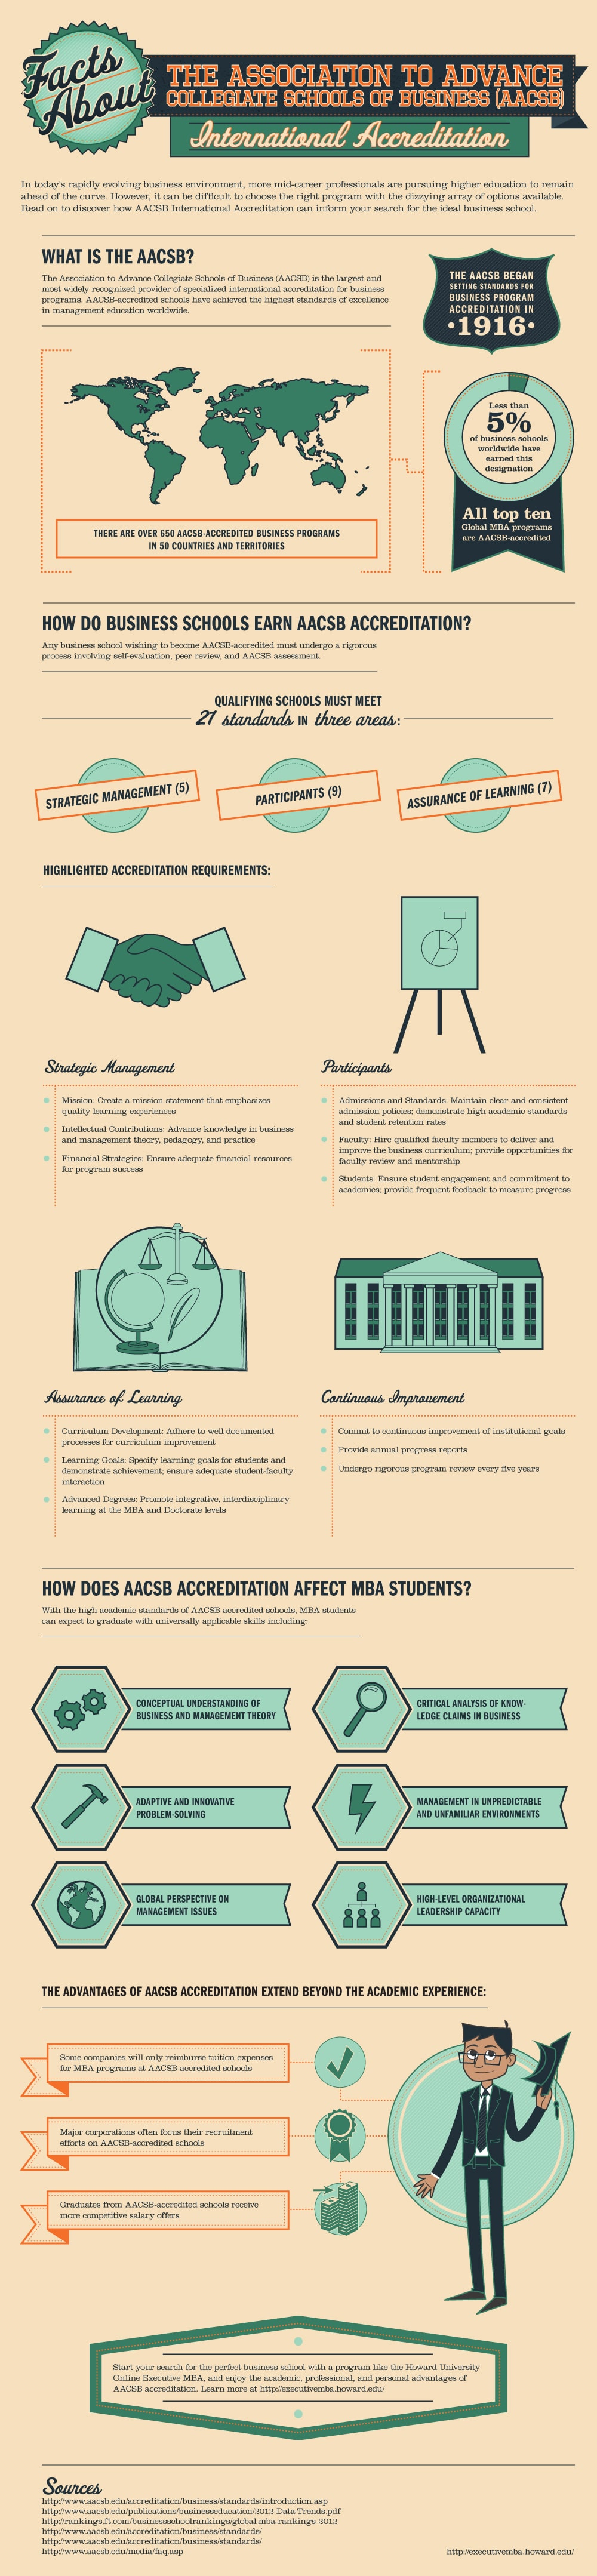 AACSB Accreditation: How It Affects College Education [Infographic]